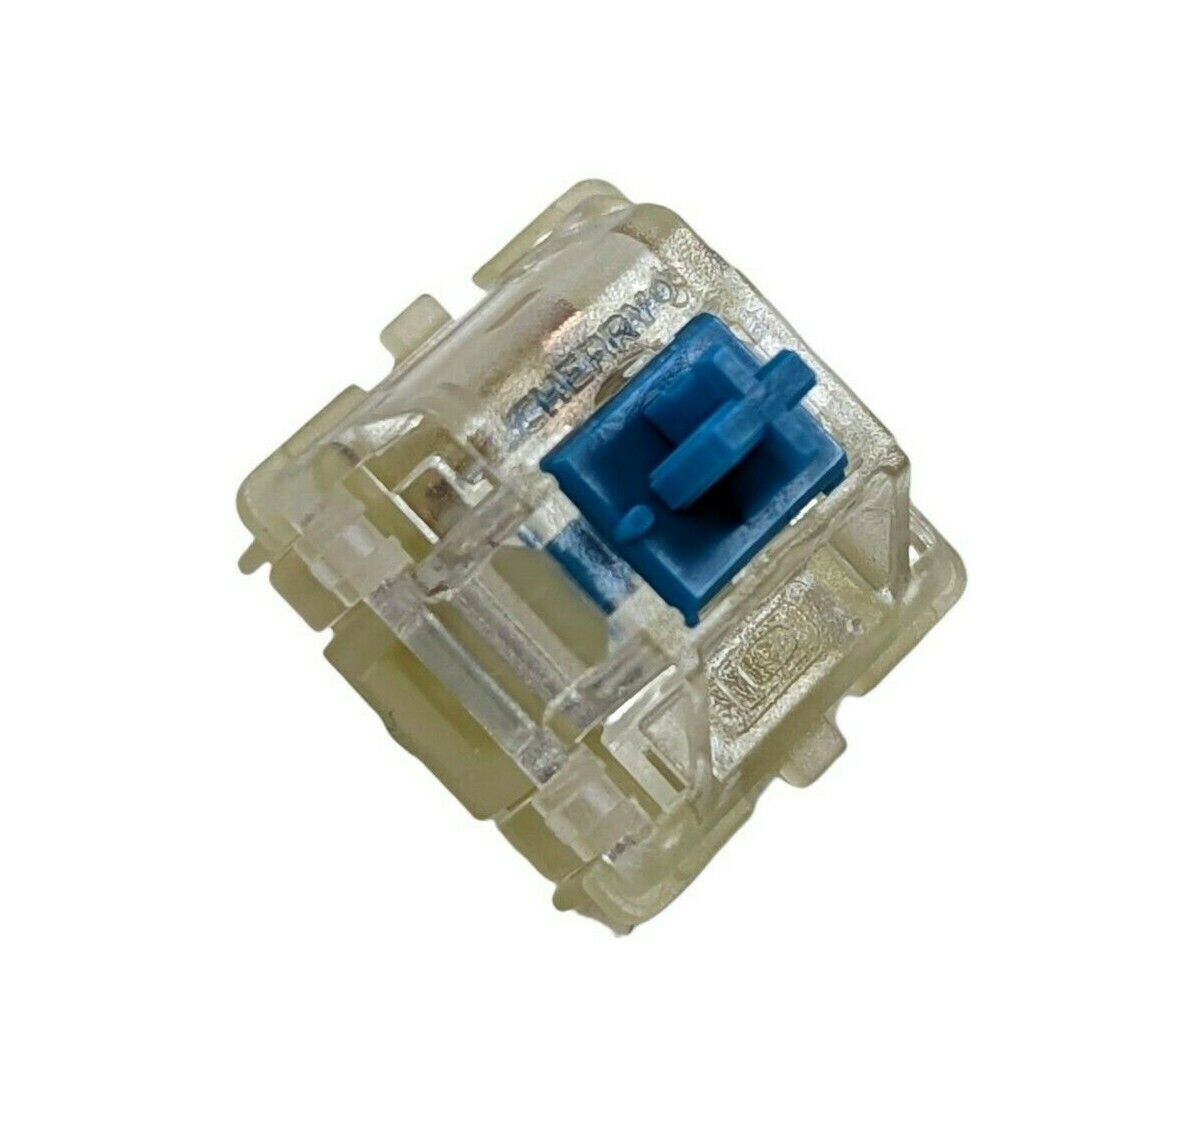 Cherry MX Blue RGB Clicky Switch for Mechanical Keyboard lot 3 Pin 60g